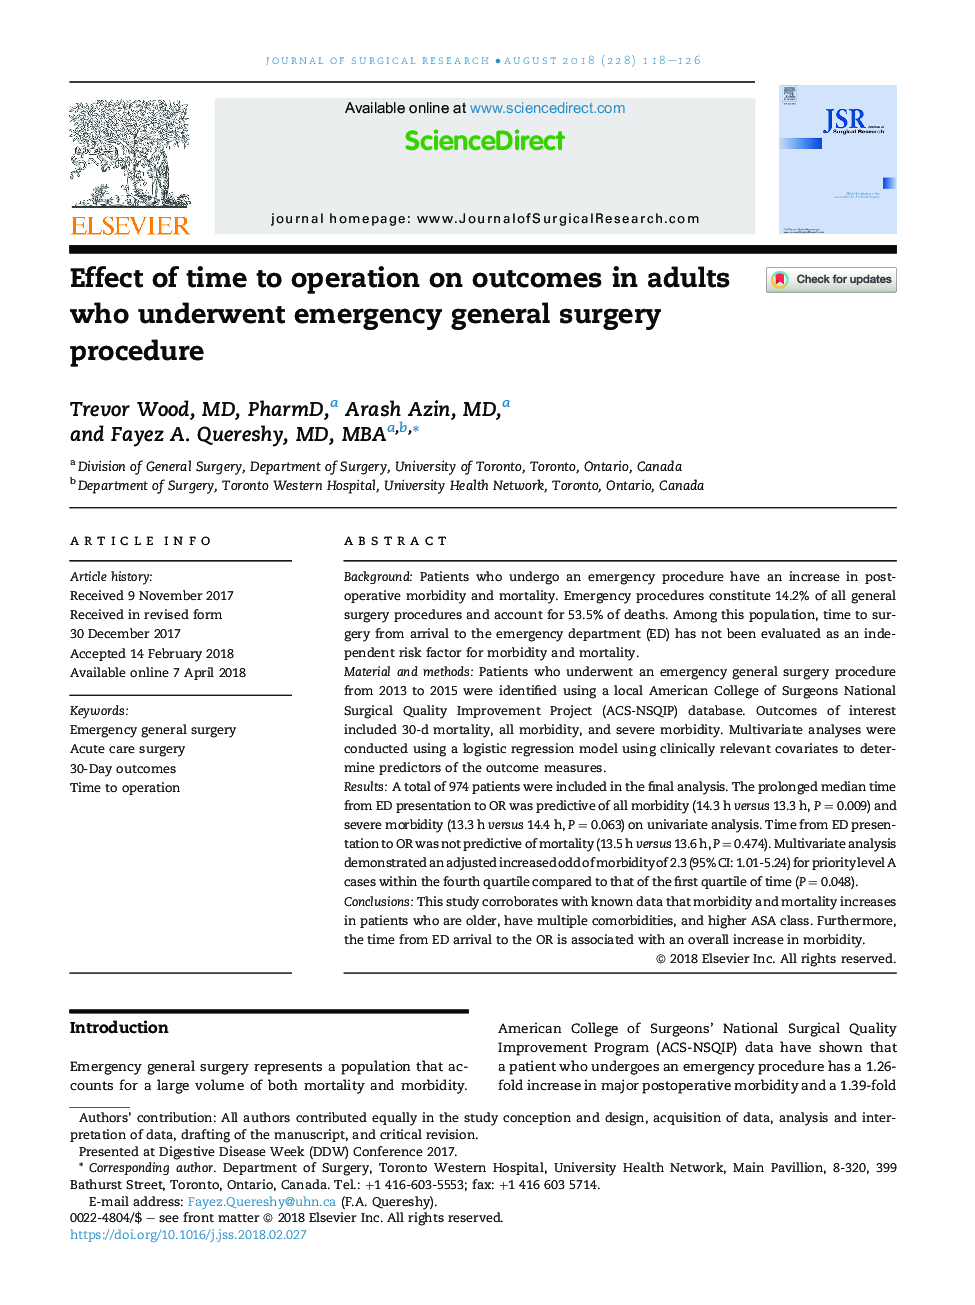 Effect of time to operation on outcomes in adults who underwent emergency general surgery procedure